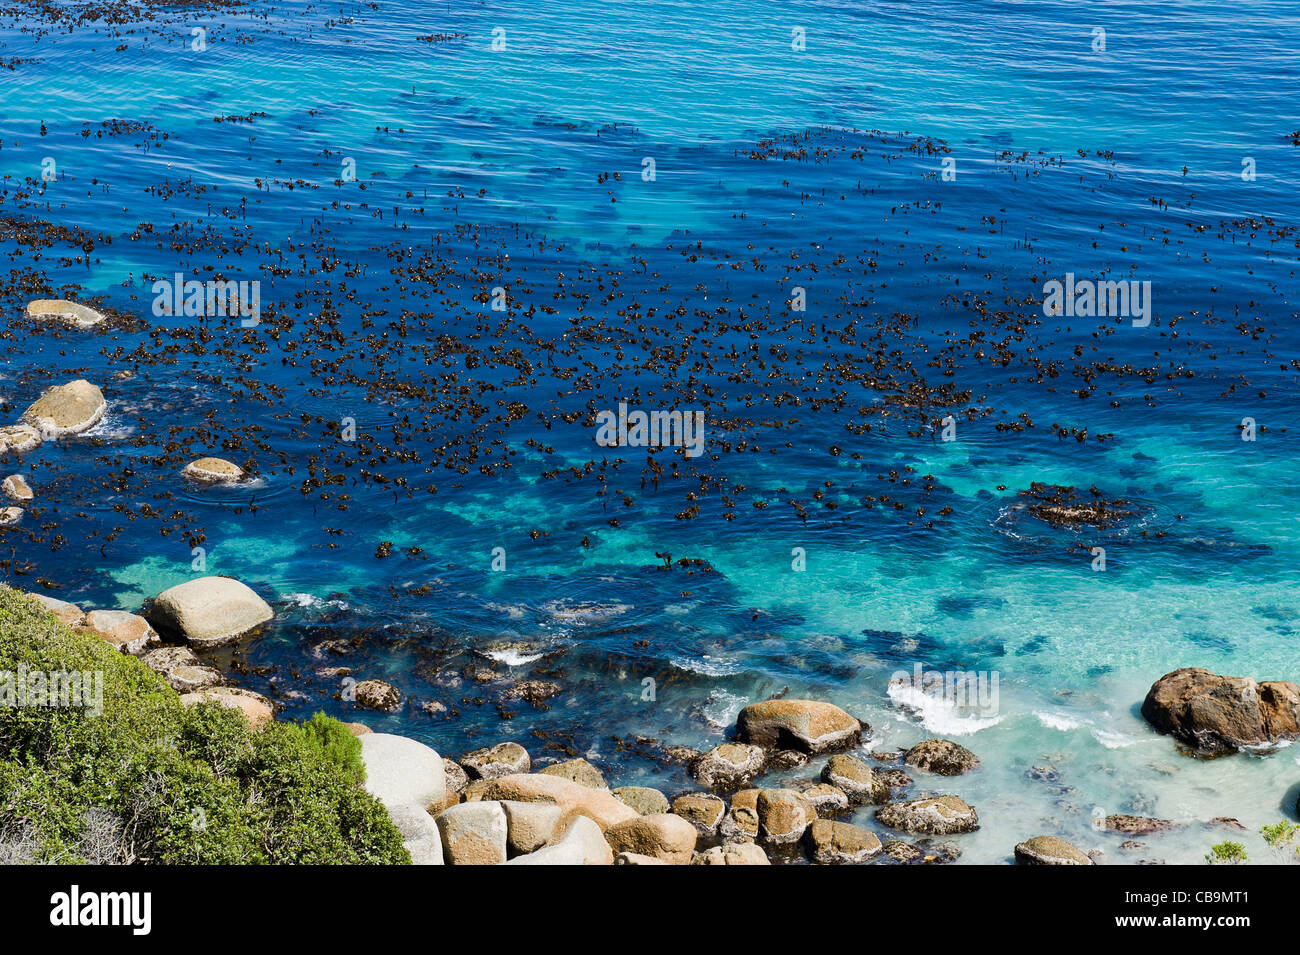 Kelp, a brown marine algae, Table Mountain National Park Marine Protected Area south of Cape Town South Africa Stock Photo